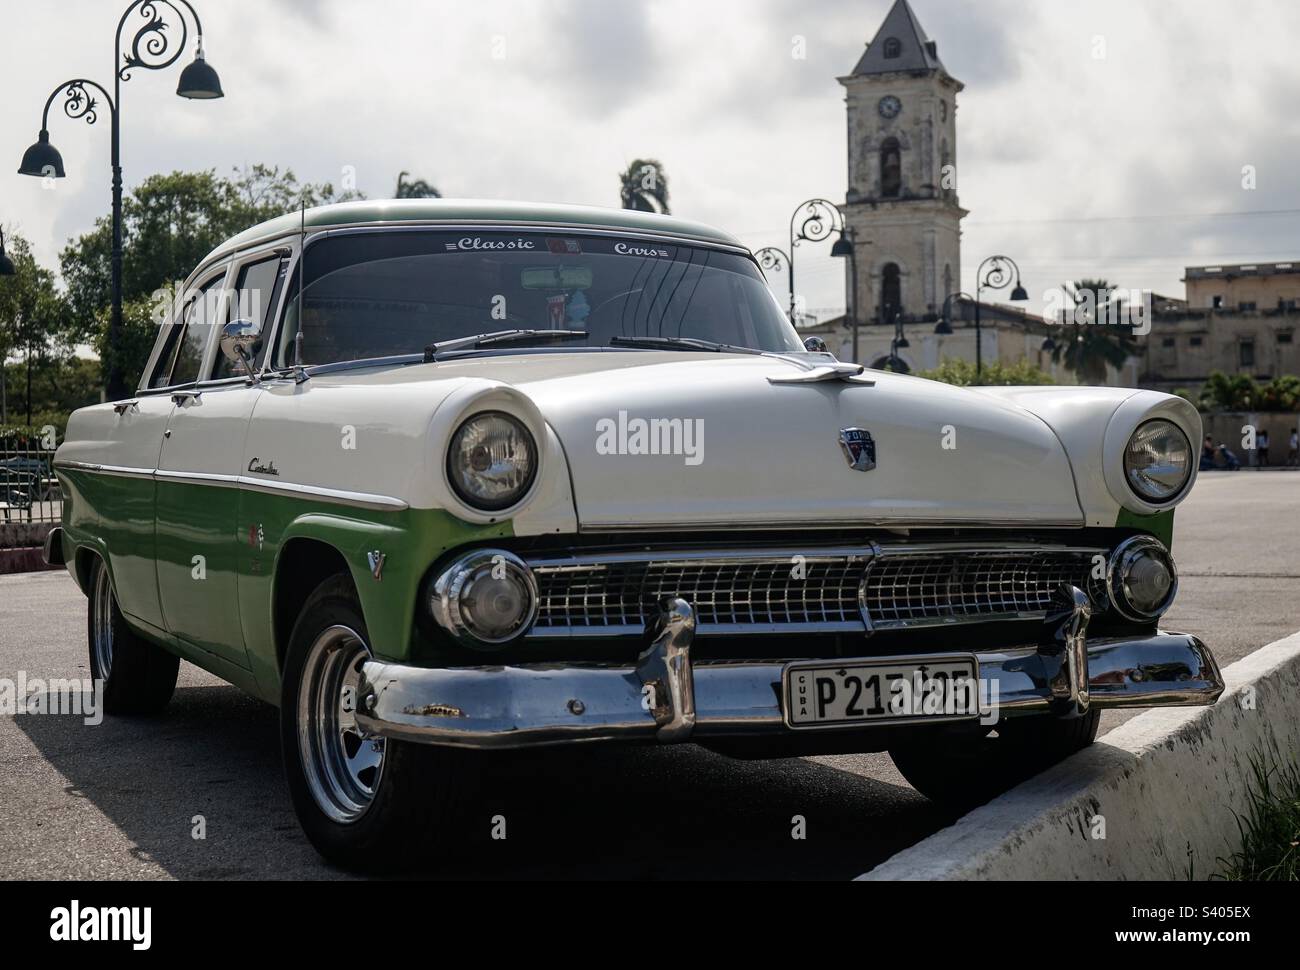 Classic Car, Ford 1955, Customline. Cuba is a paradise for lovers of vintage cars.  Today it is very common to find many cars from the 50s that are still in good condition. Stock Photo